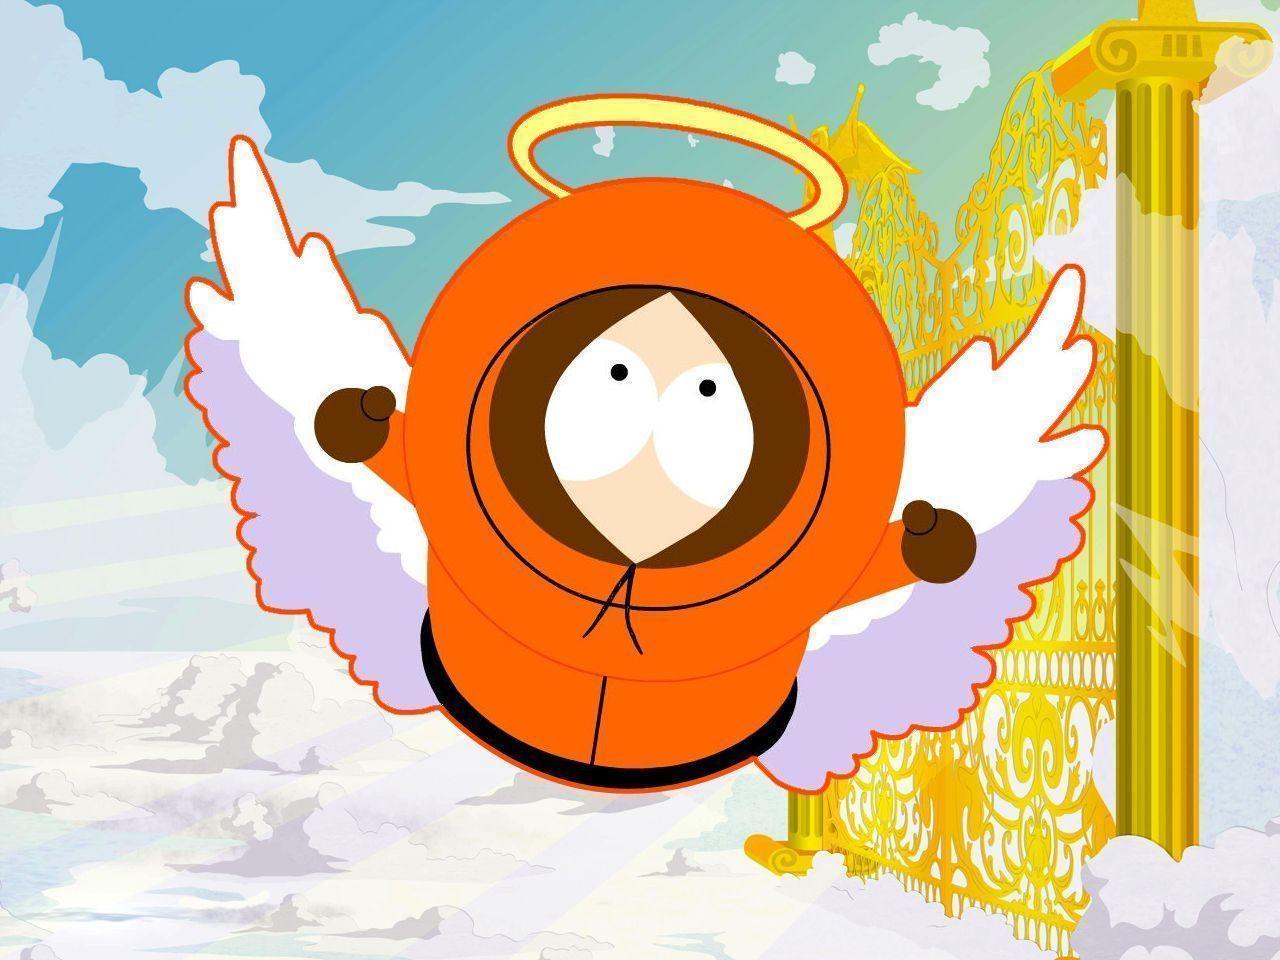 South Park Wallpapers by Isforever.